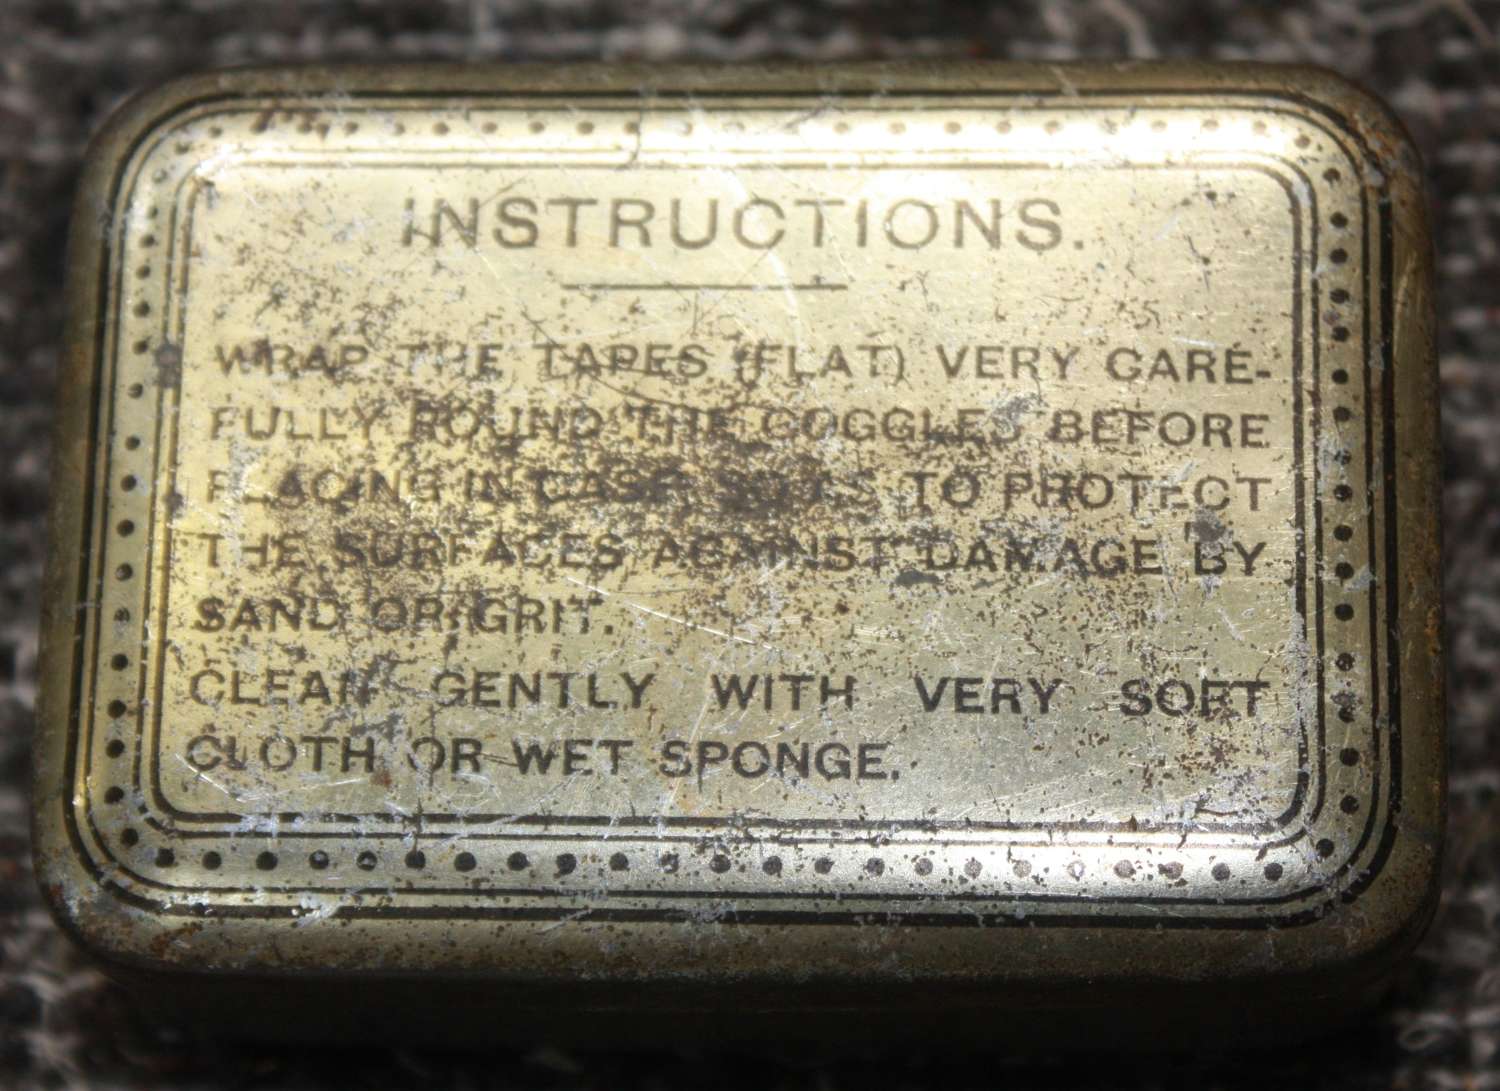 A PAIR OF WWII ORANGE TINTED GOGGLES CONTAINED IN THERE METAL TIN